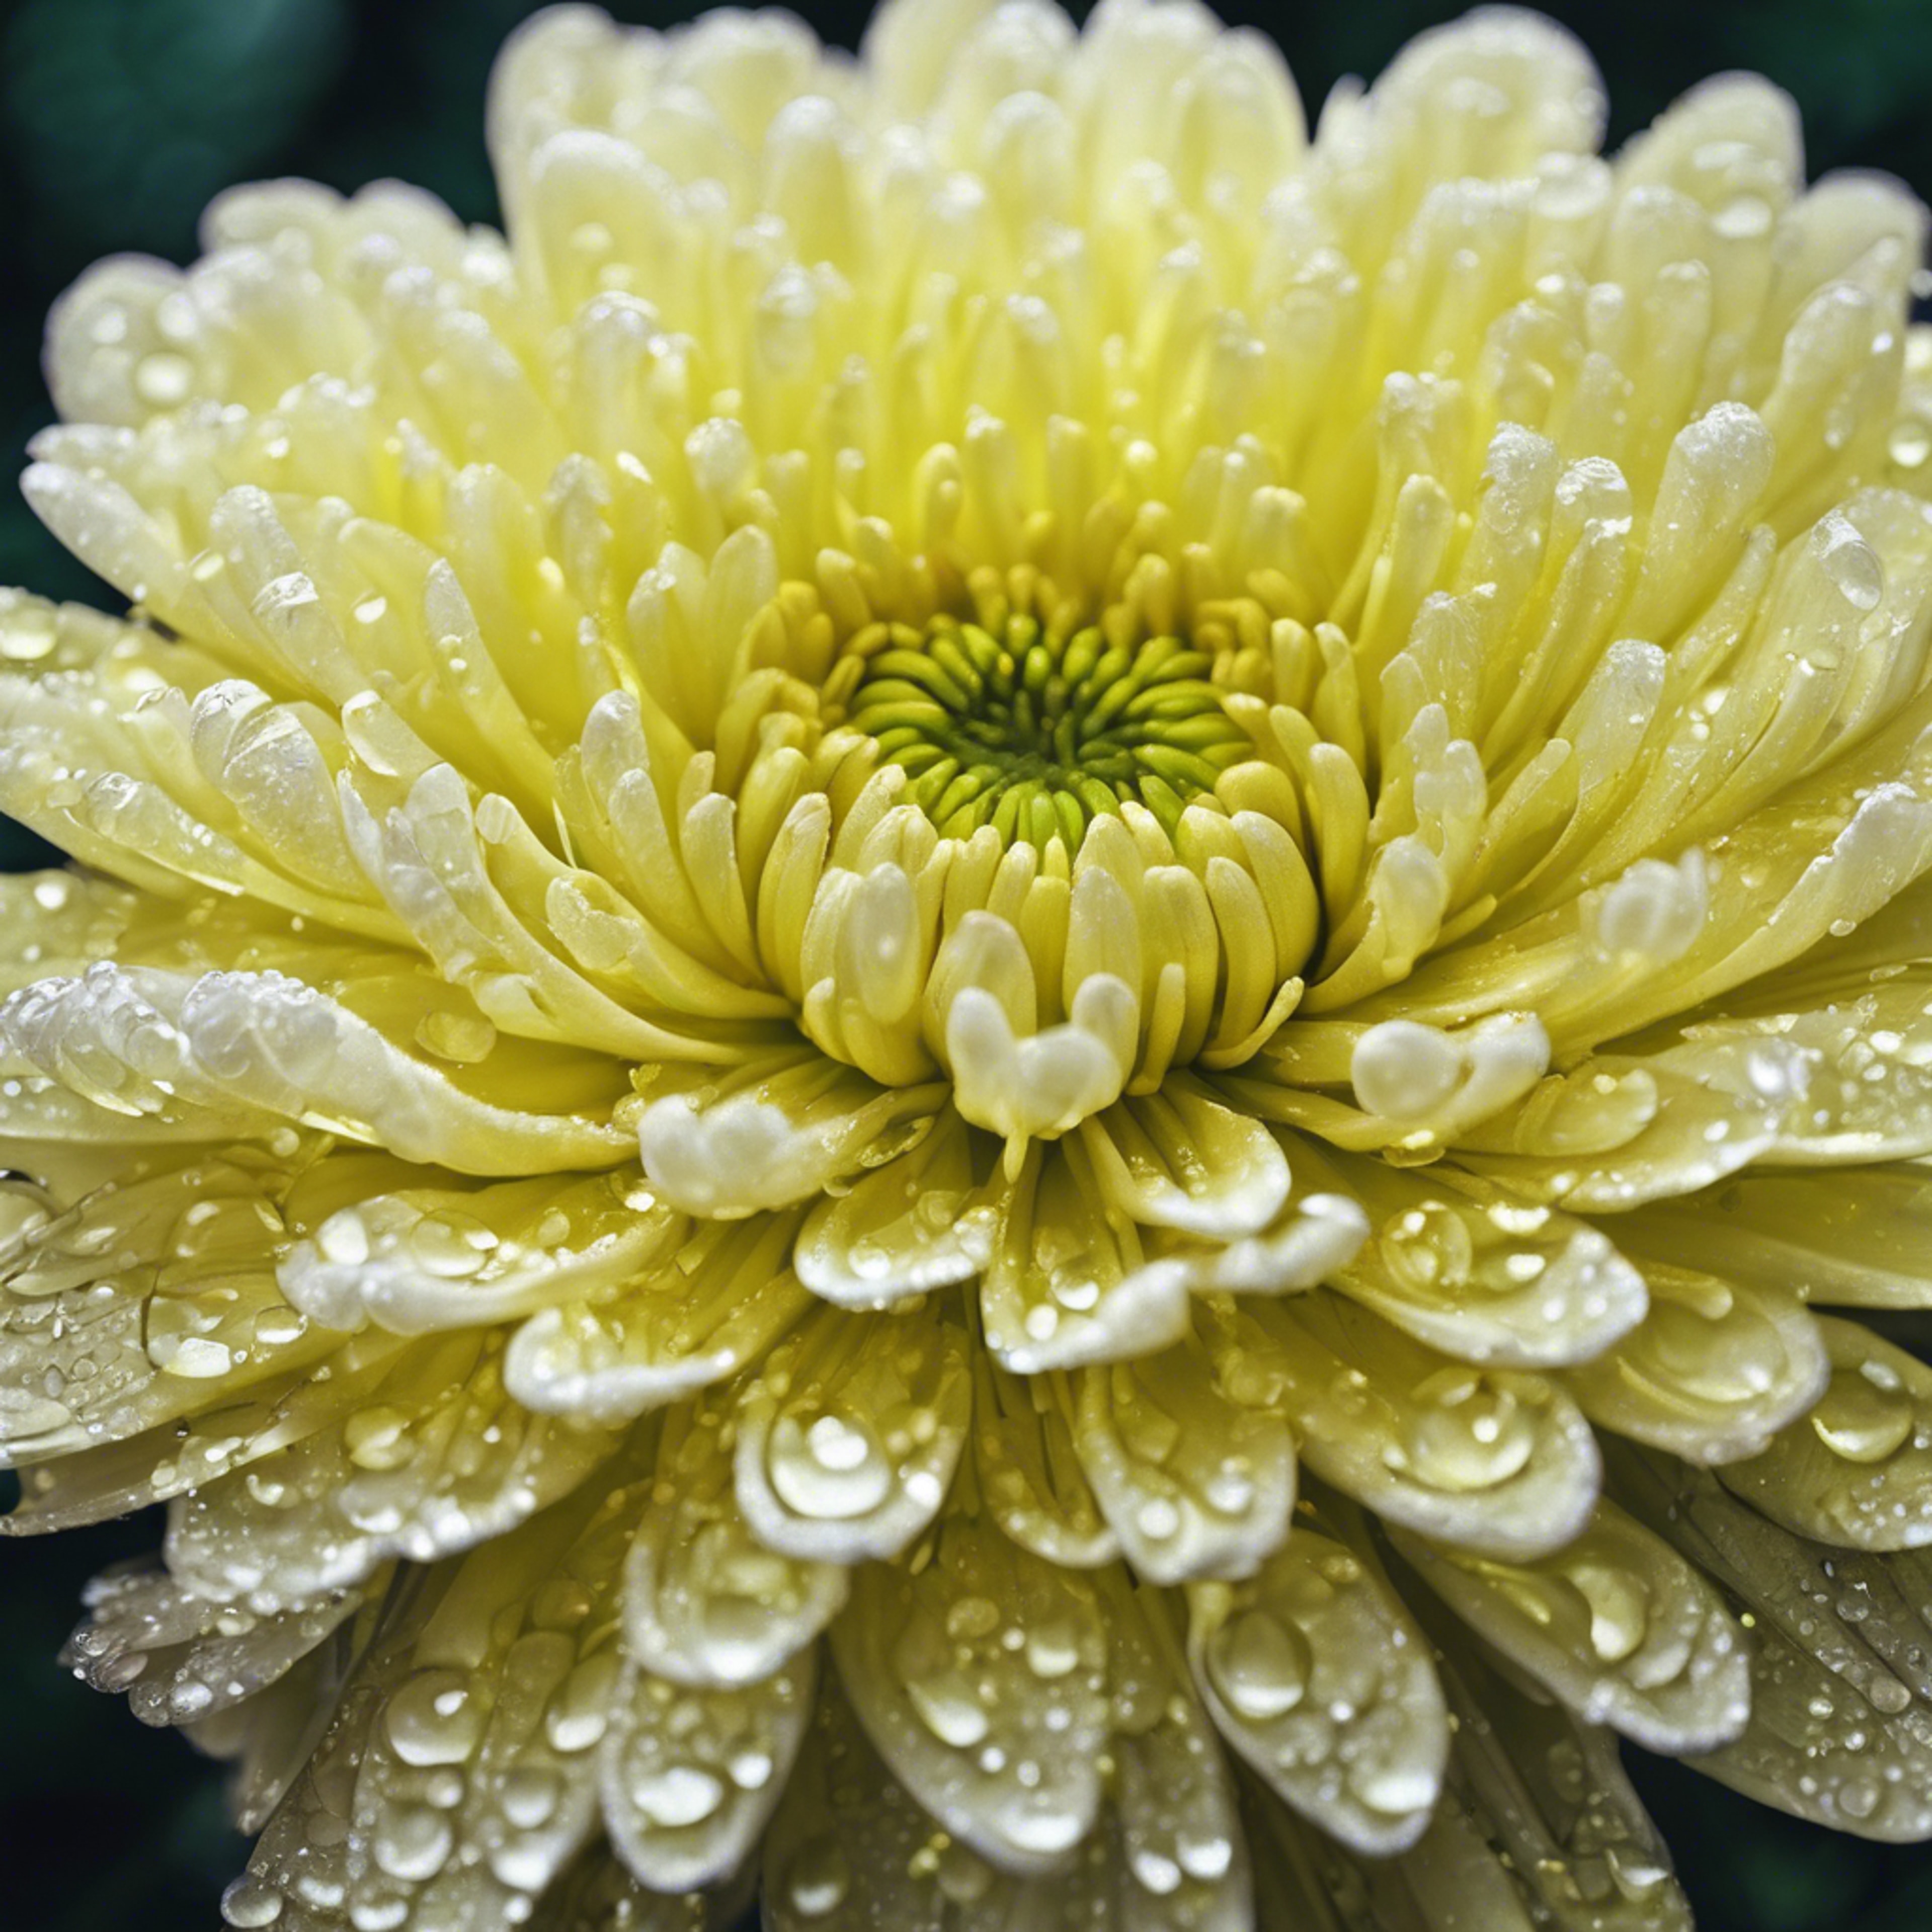 Close up of a neon yellow chrysanthemum with morning dew drops.壁紙[0dbc614e1ec6416aa903]